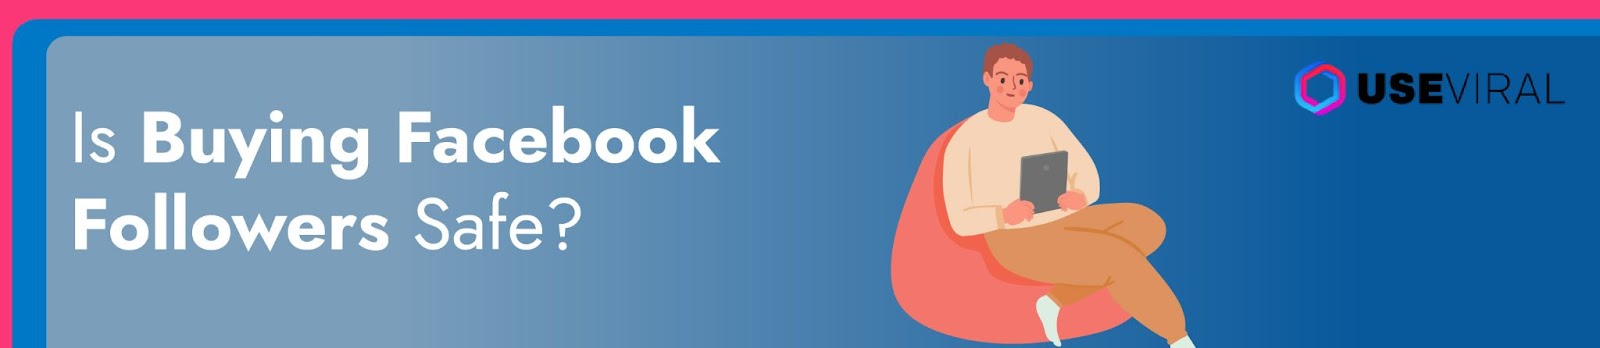 Is Buying Facebook Followers Safe?